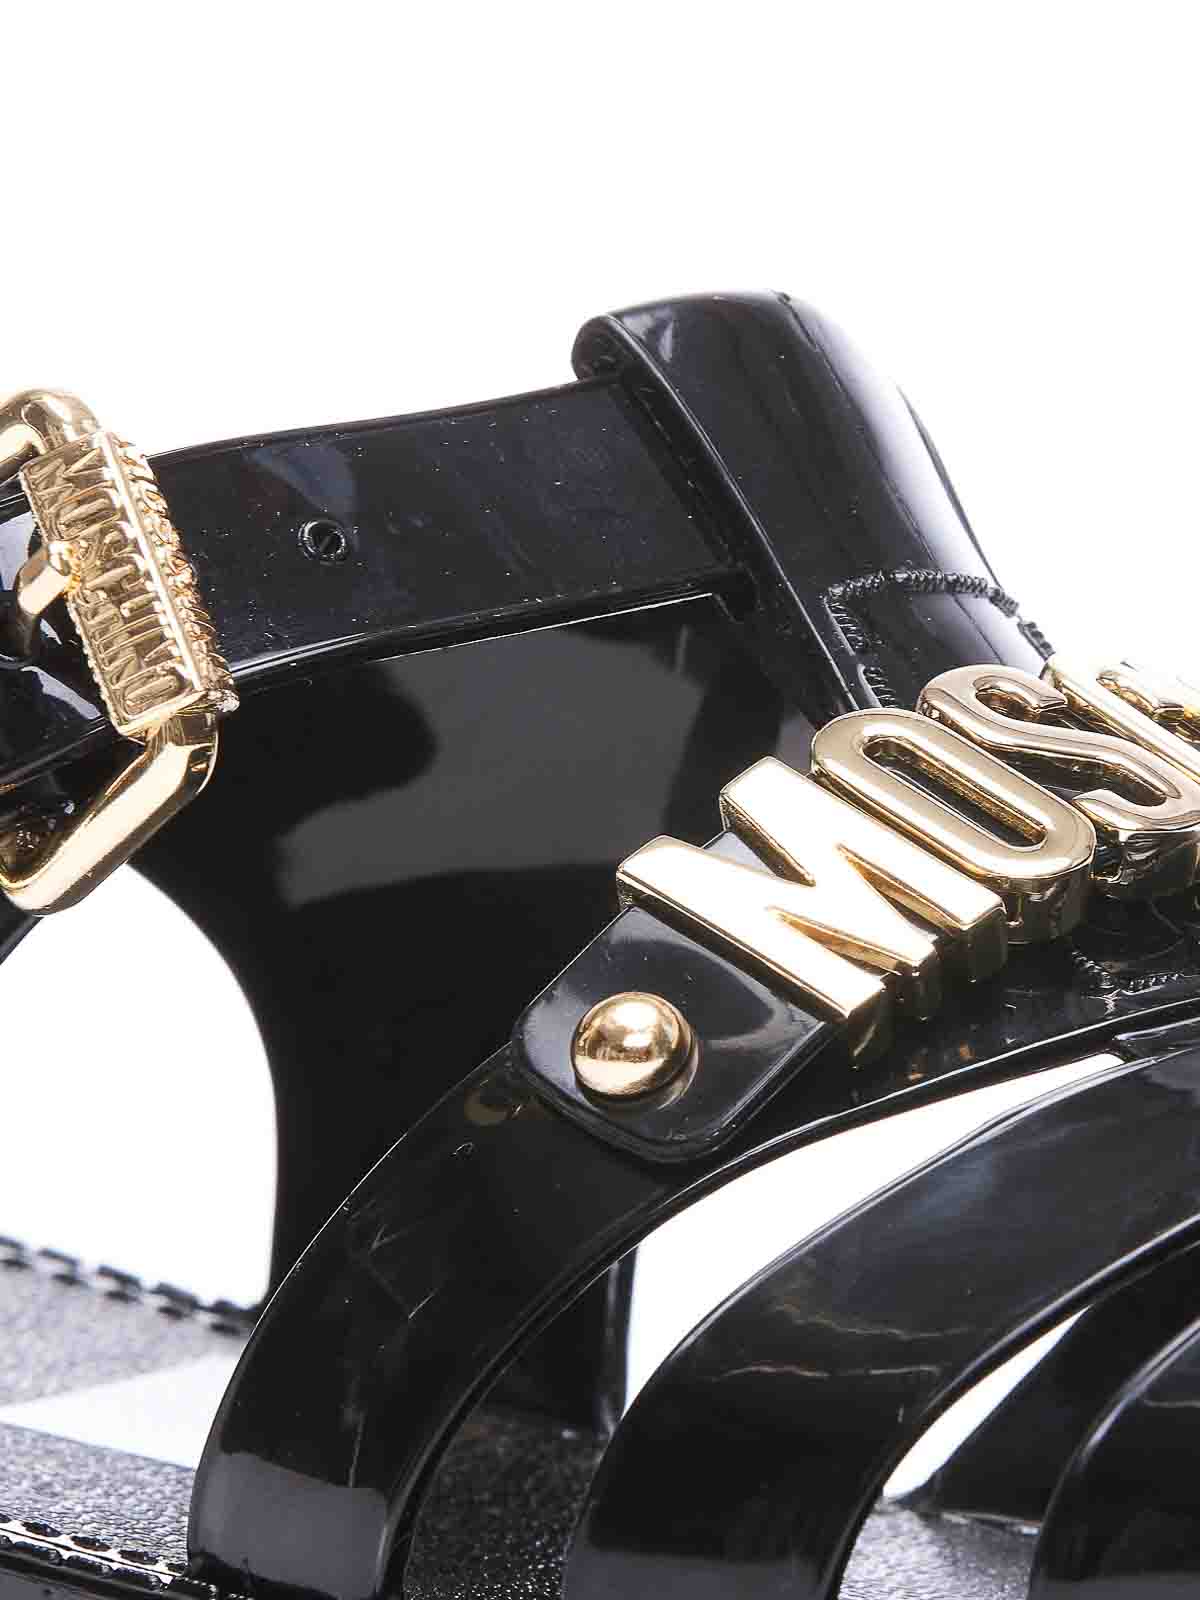 Shop Moschino Jelly Sandals With Lettering Logo In Black